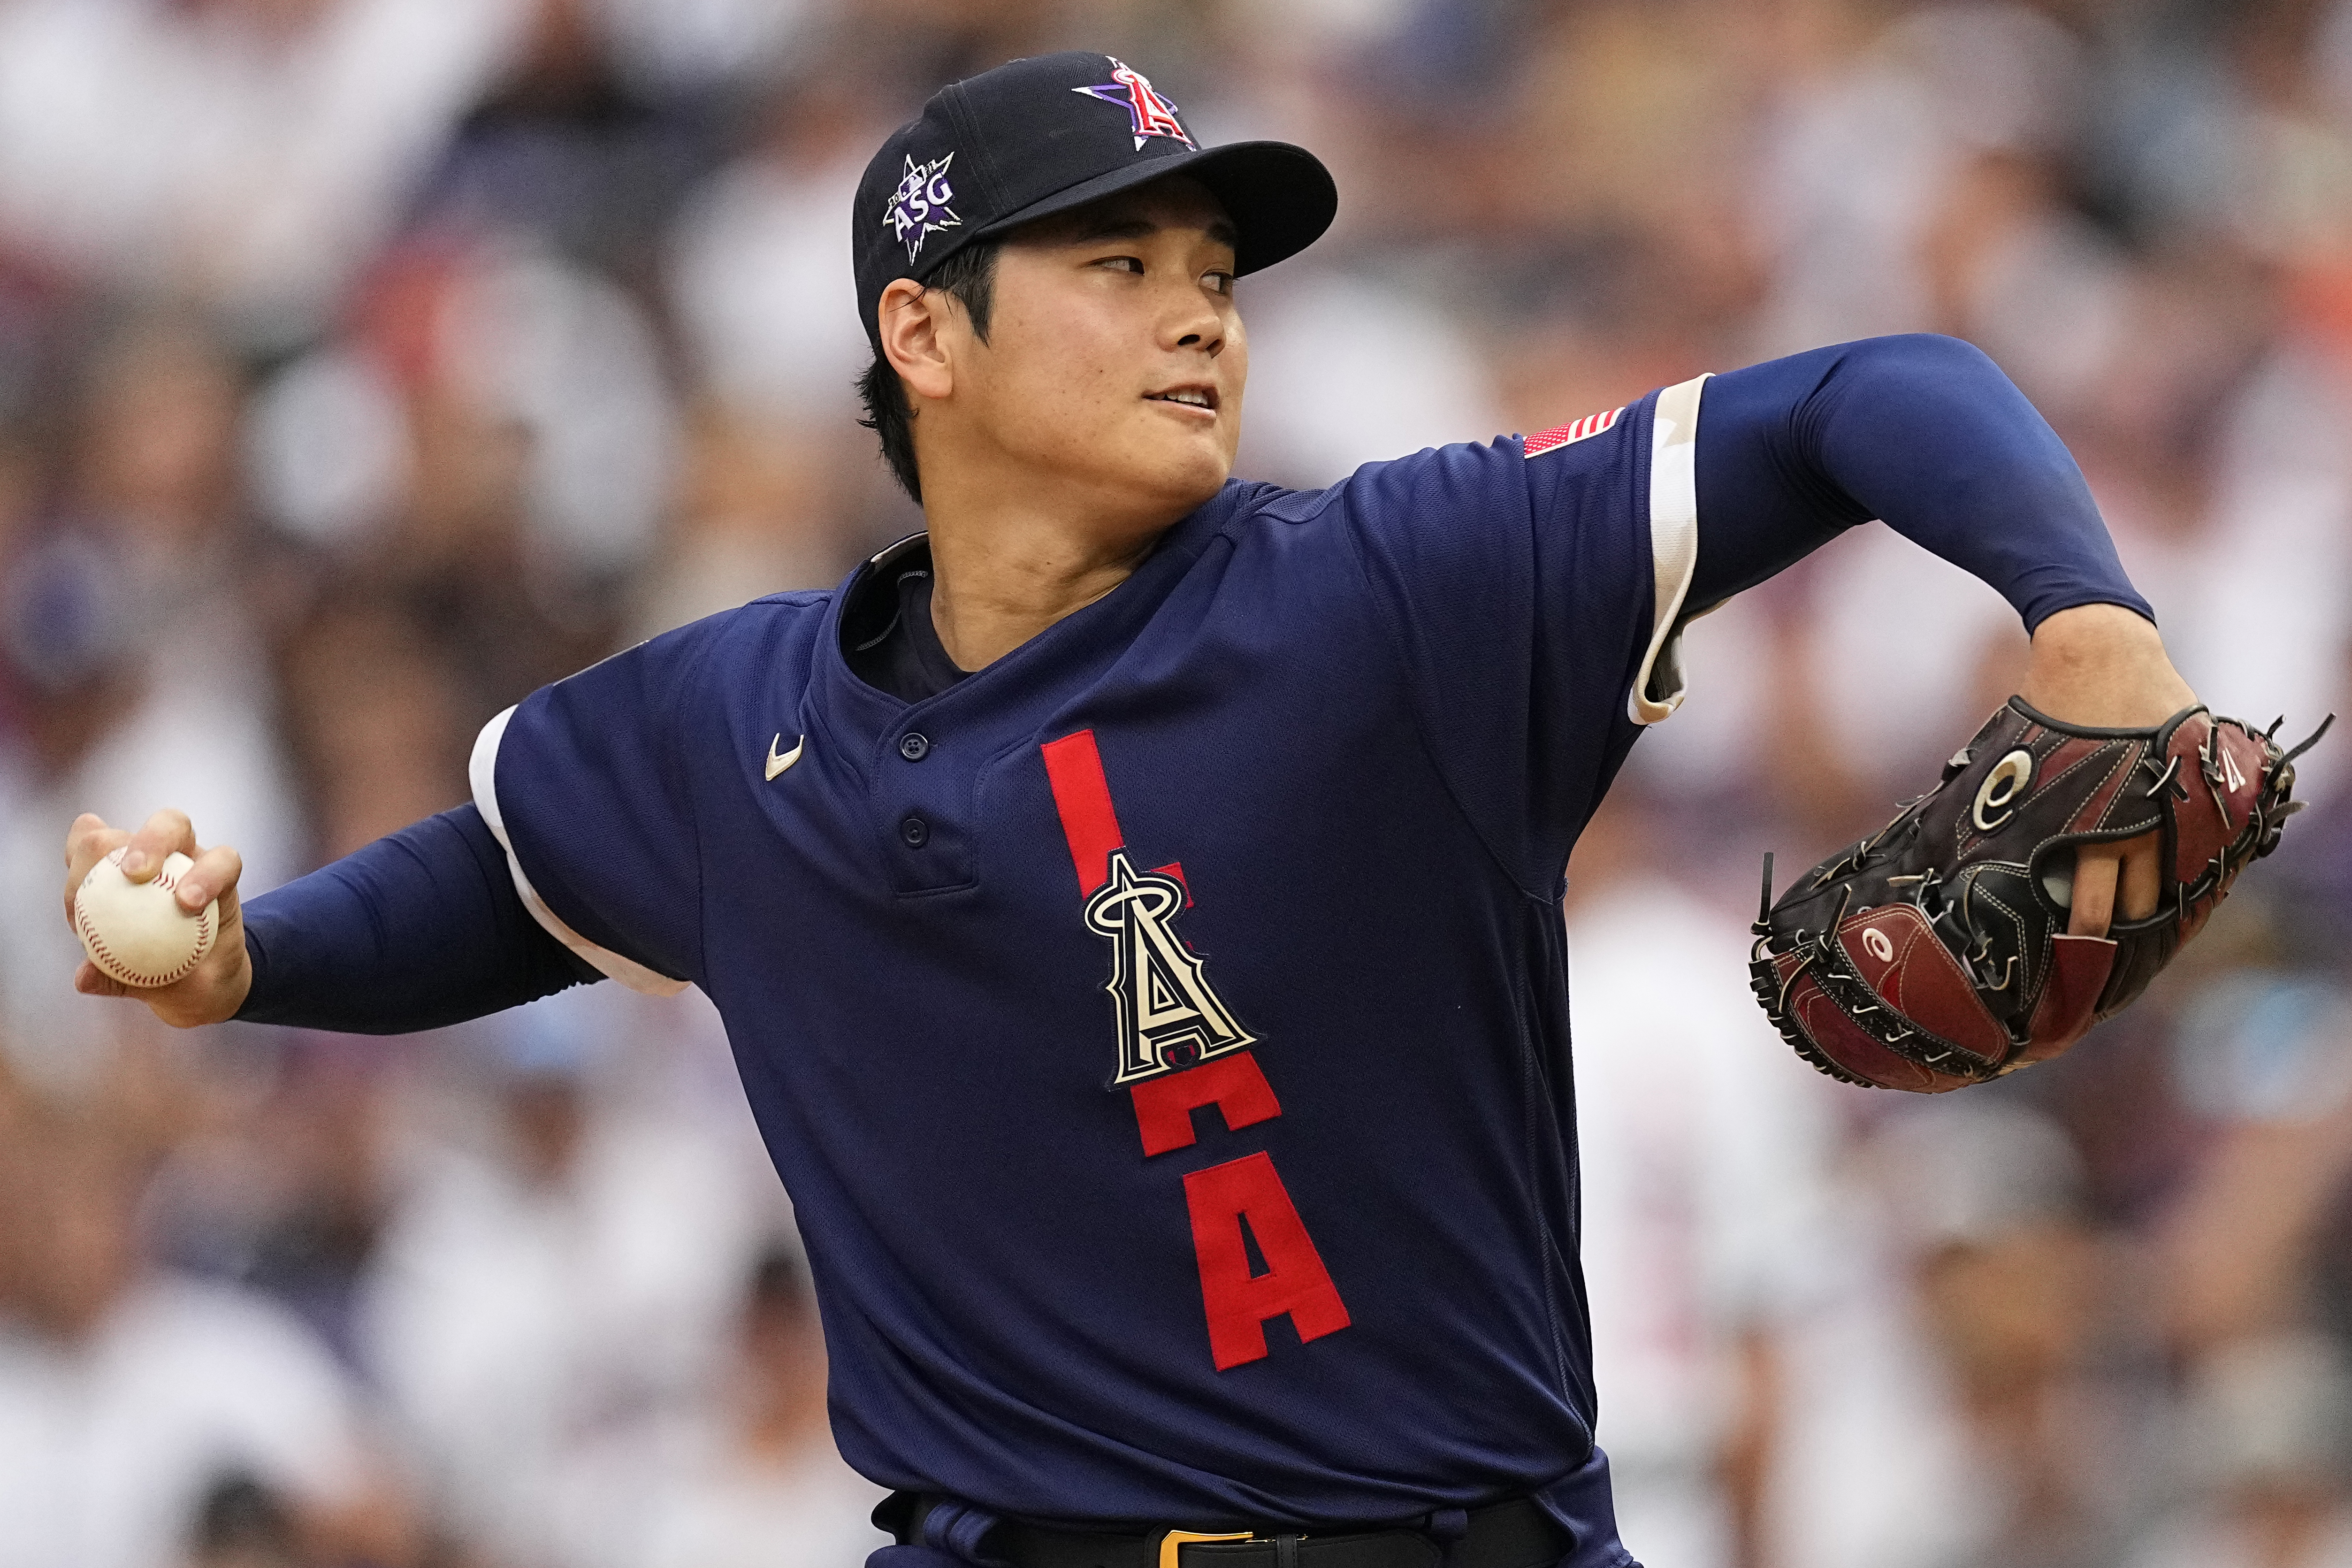 3 UP, 3 DOWN! Shohei Ohtani starts All-Star Game with 1-2-3 inning